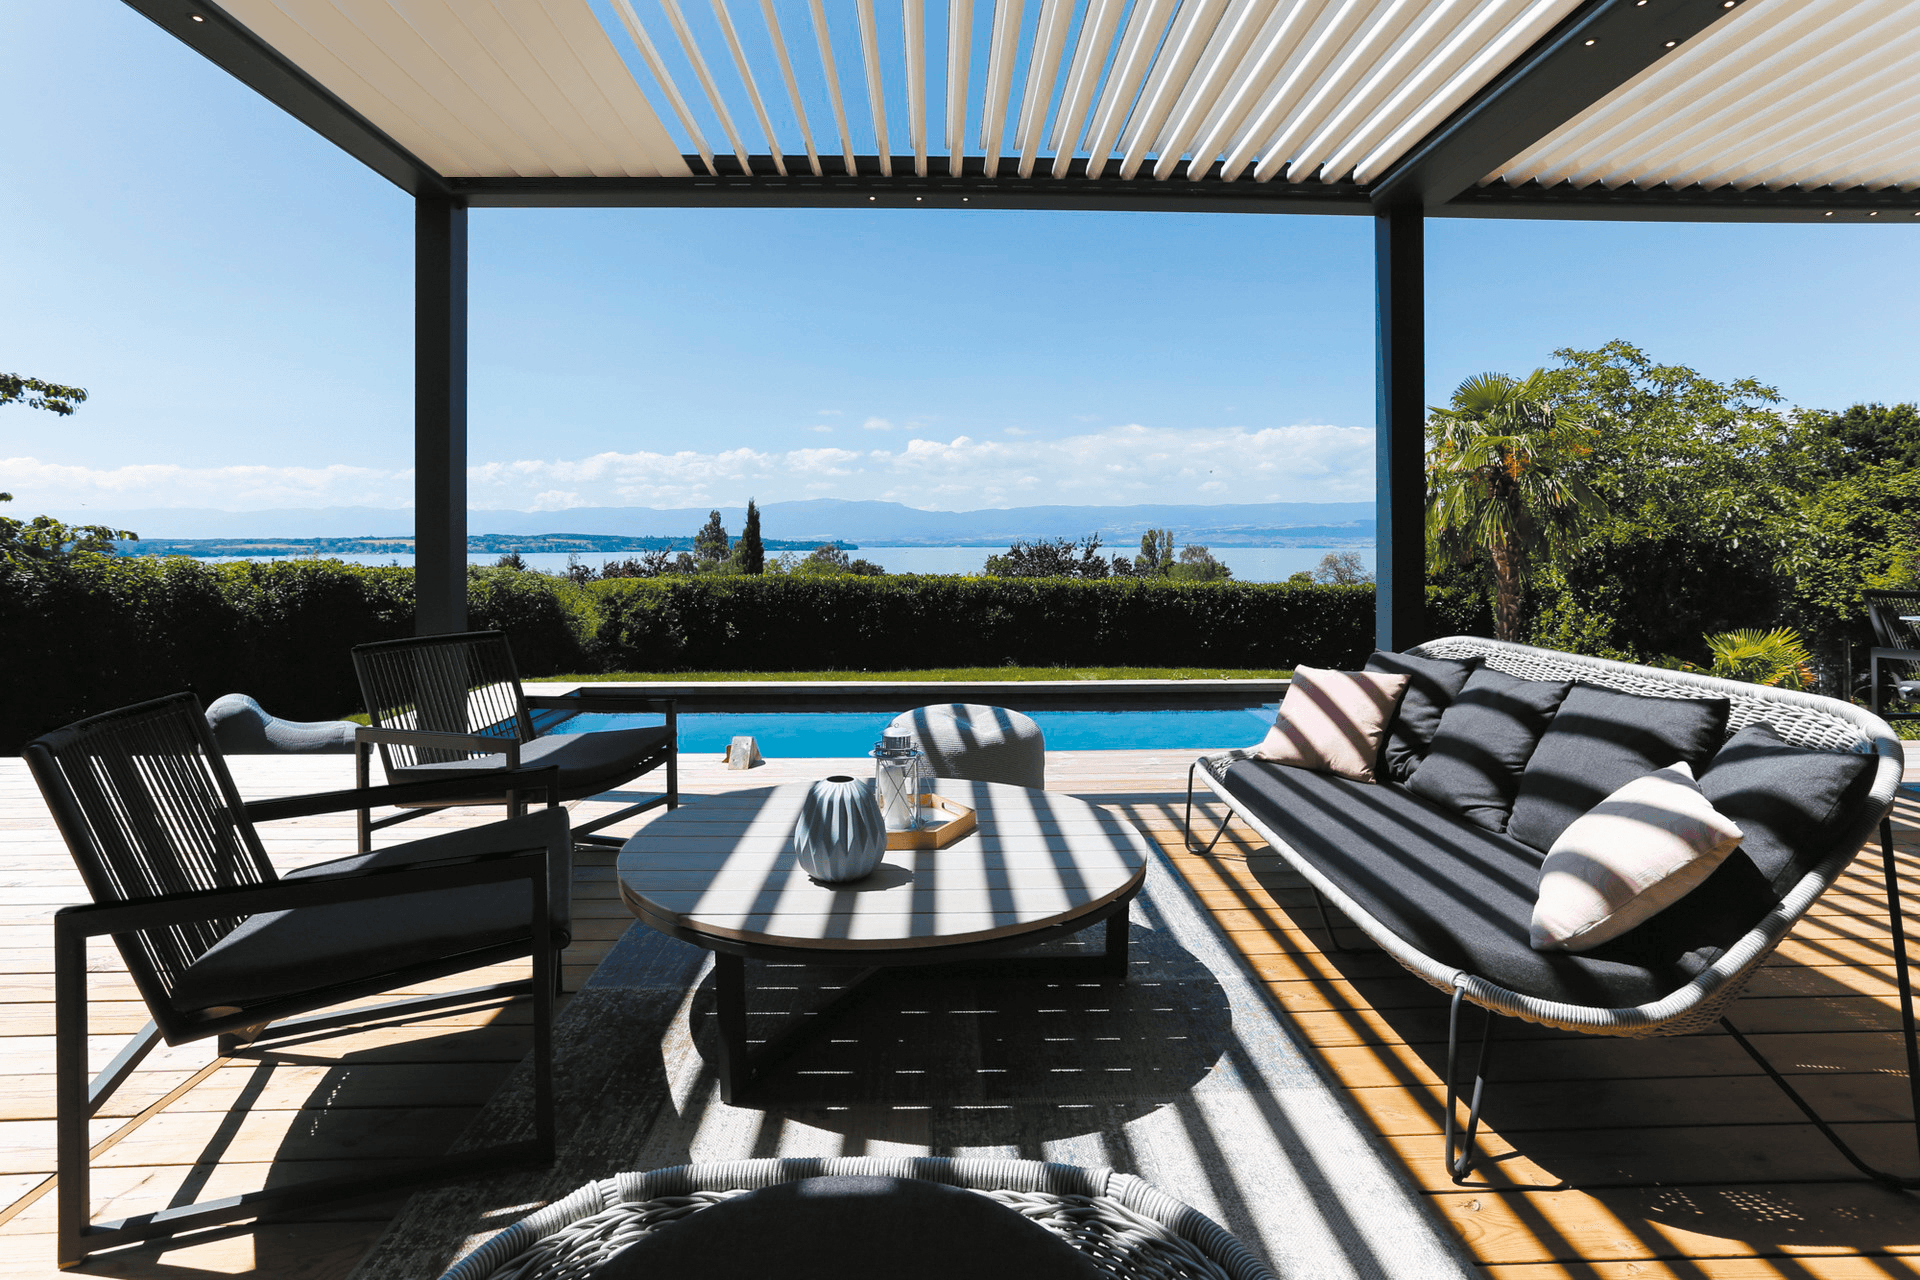 Biossun bioclimatic pergola from below with shades and garden furniture